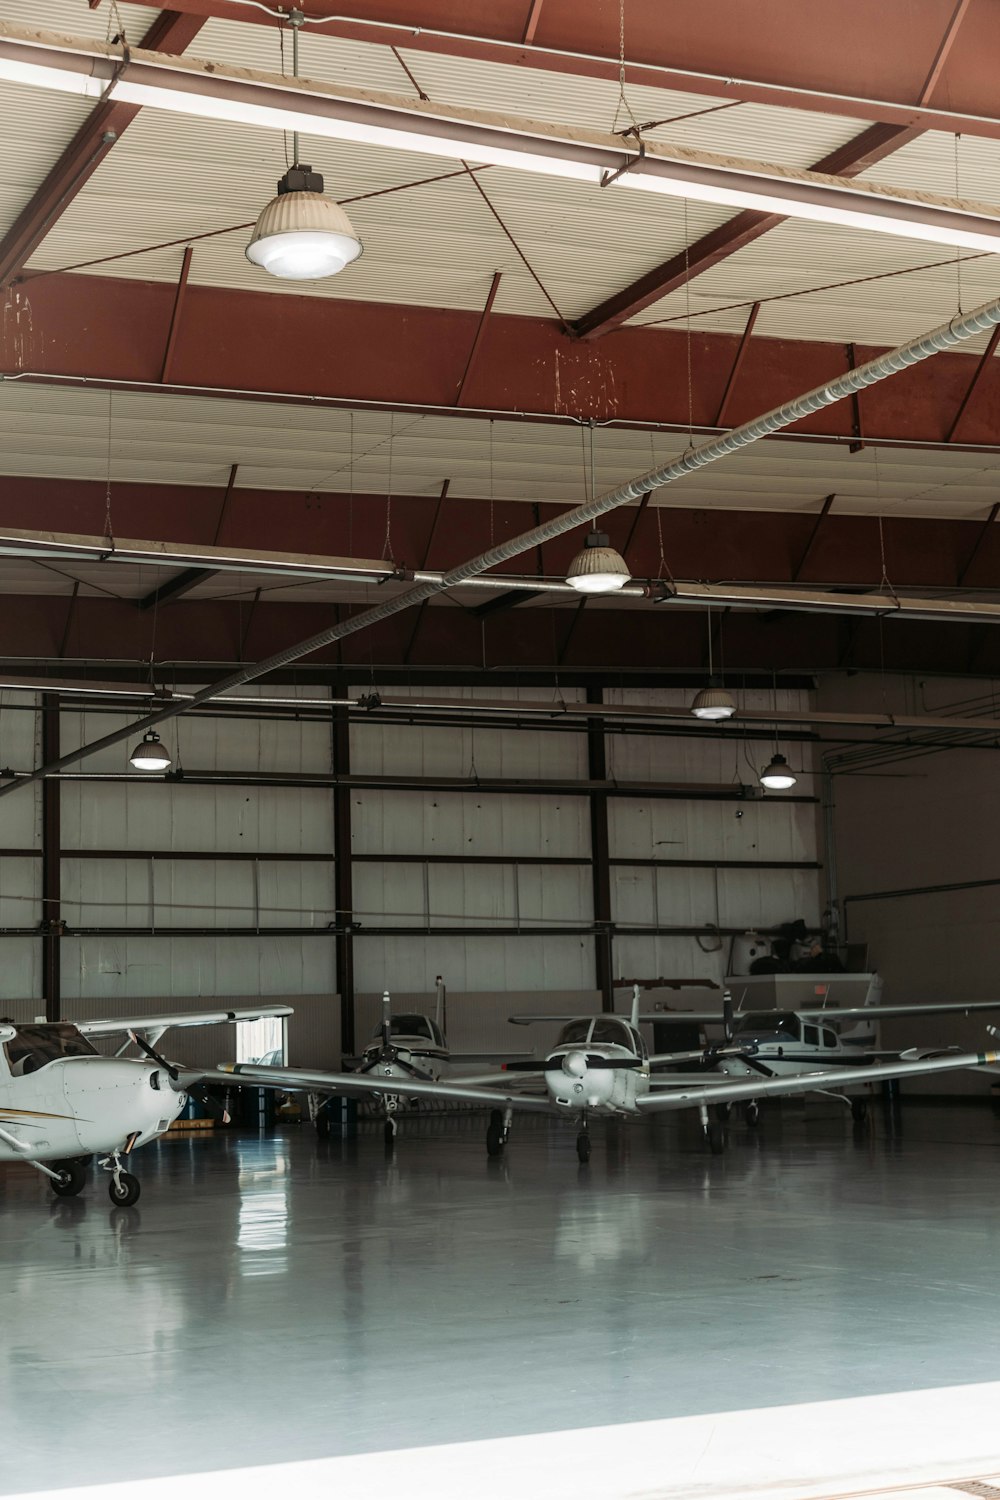 two airplanes are parked in a large hanger